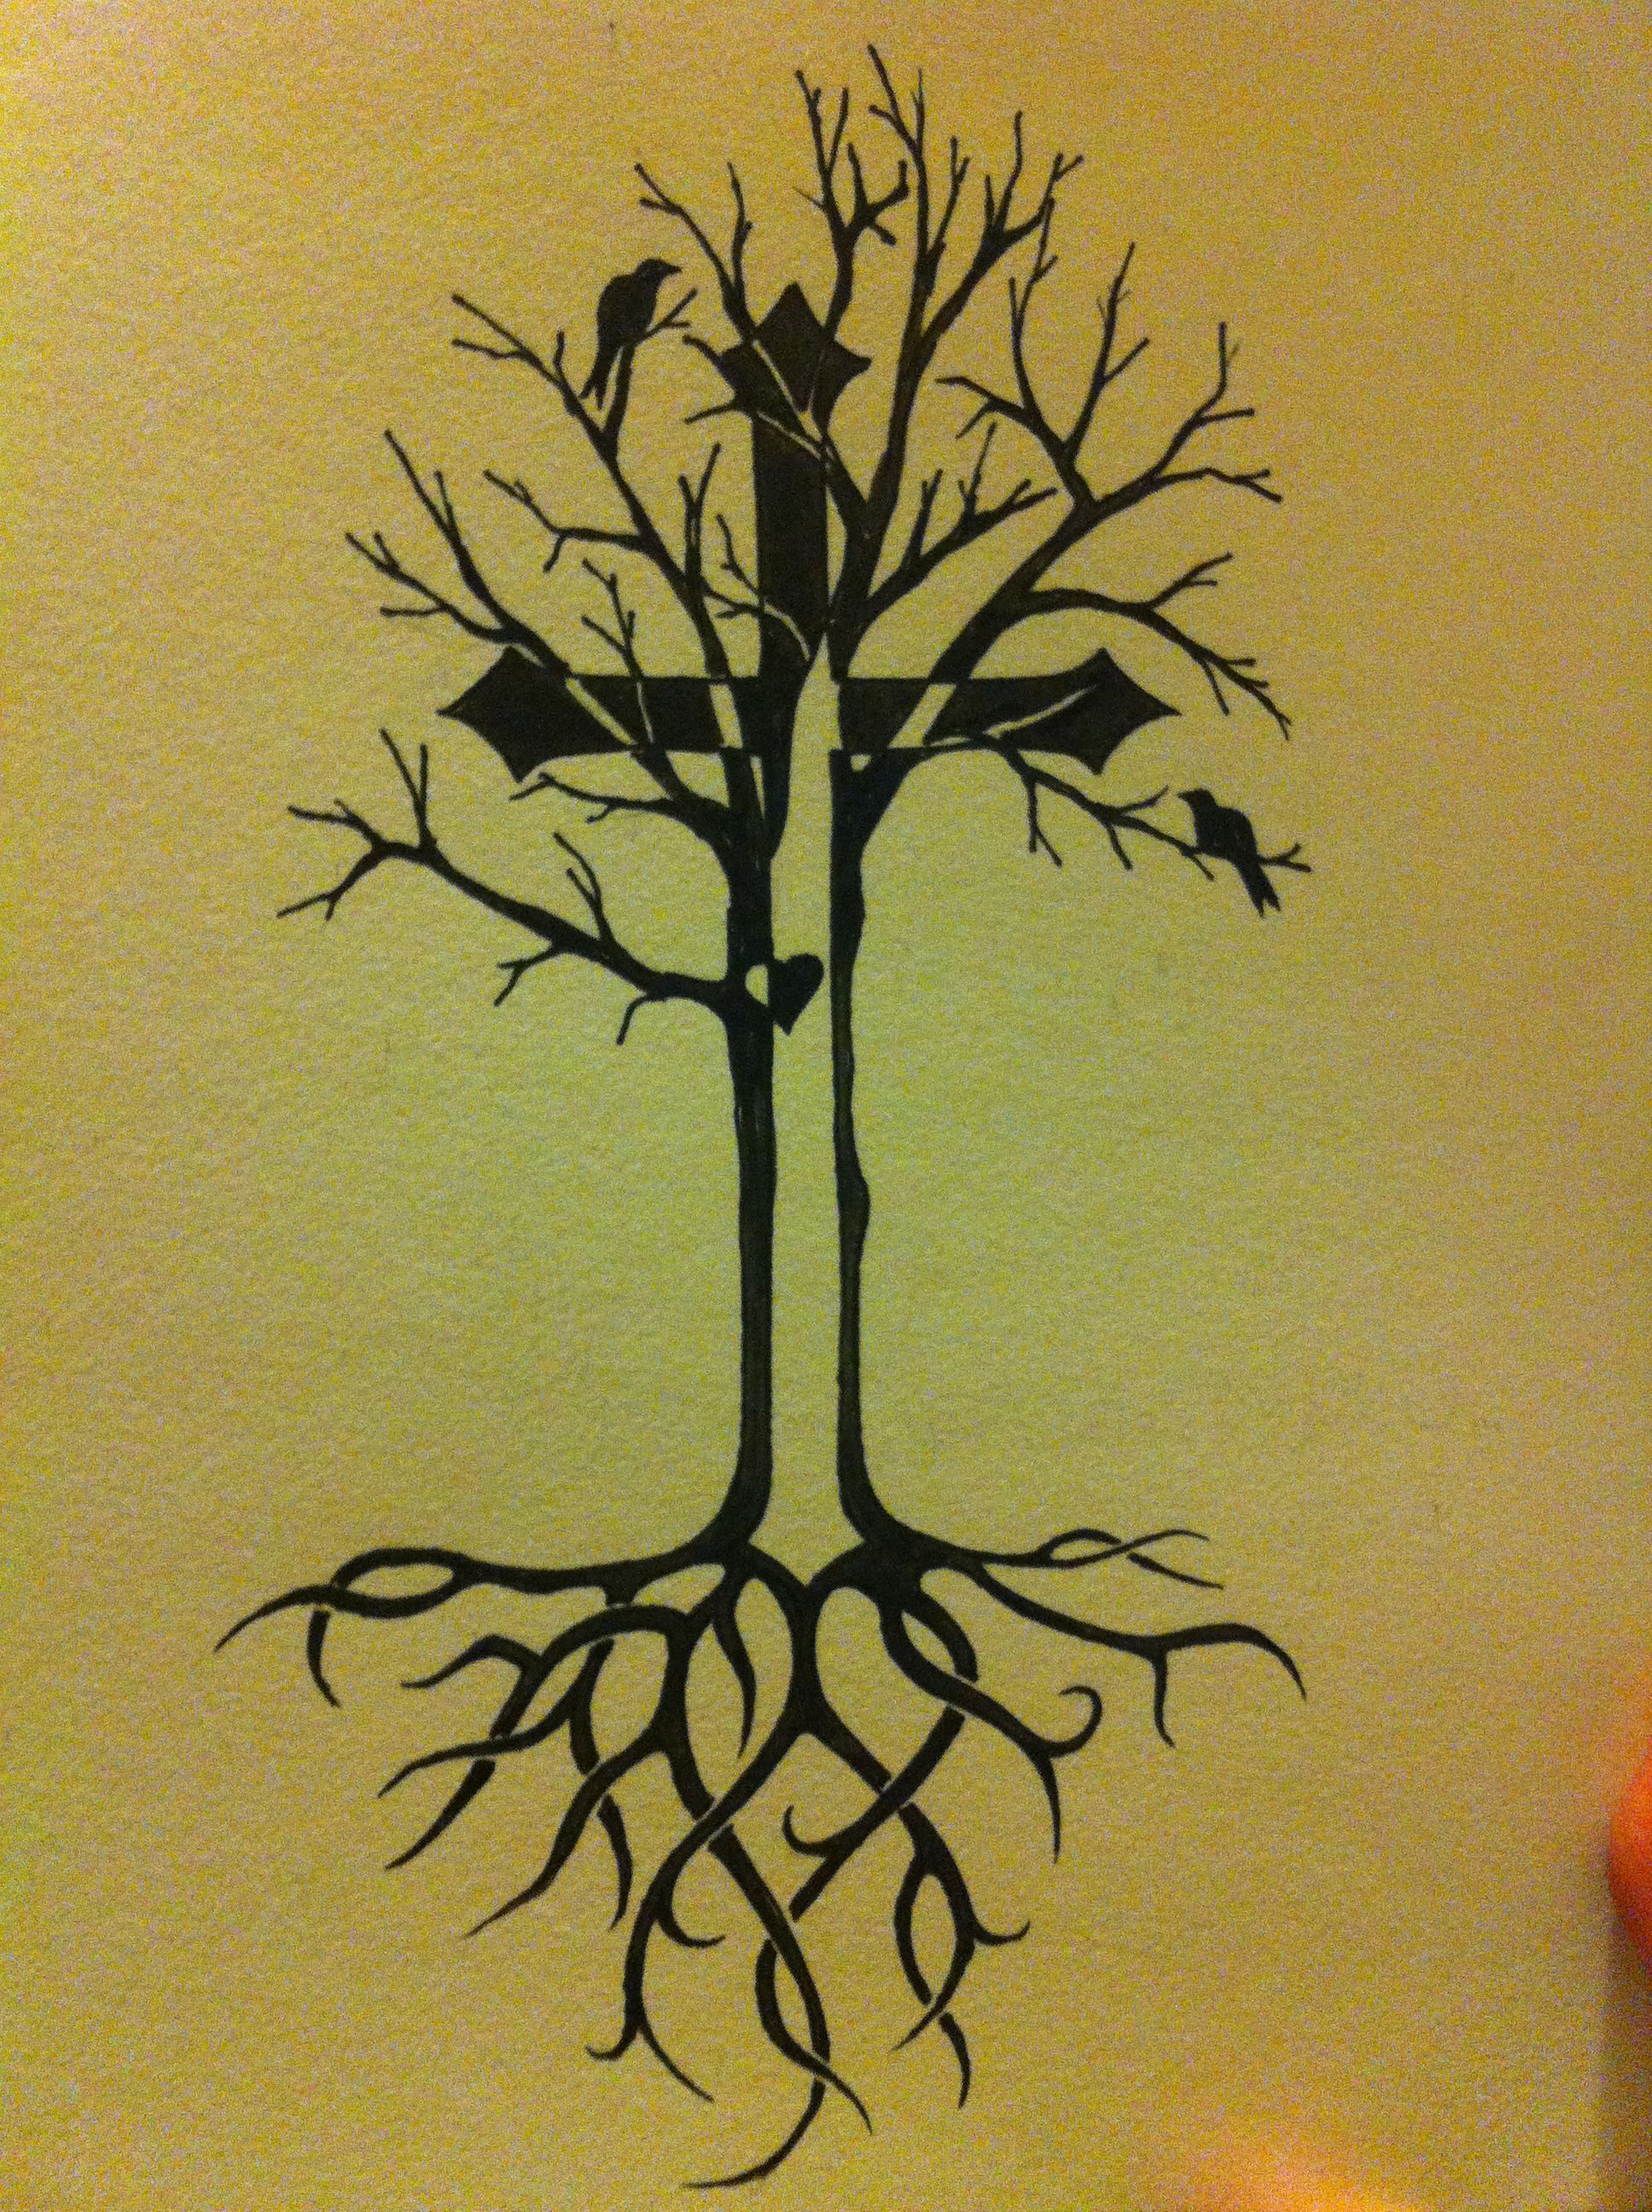 Tree Of Life Tattoo Idea With Celtic Roots And Cross Tattoo Ideas within dimensions 1936 X 2592